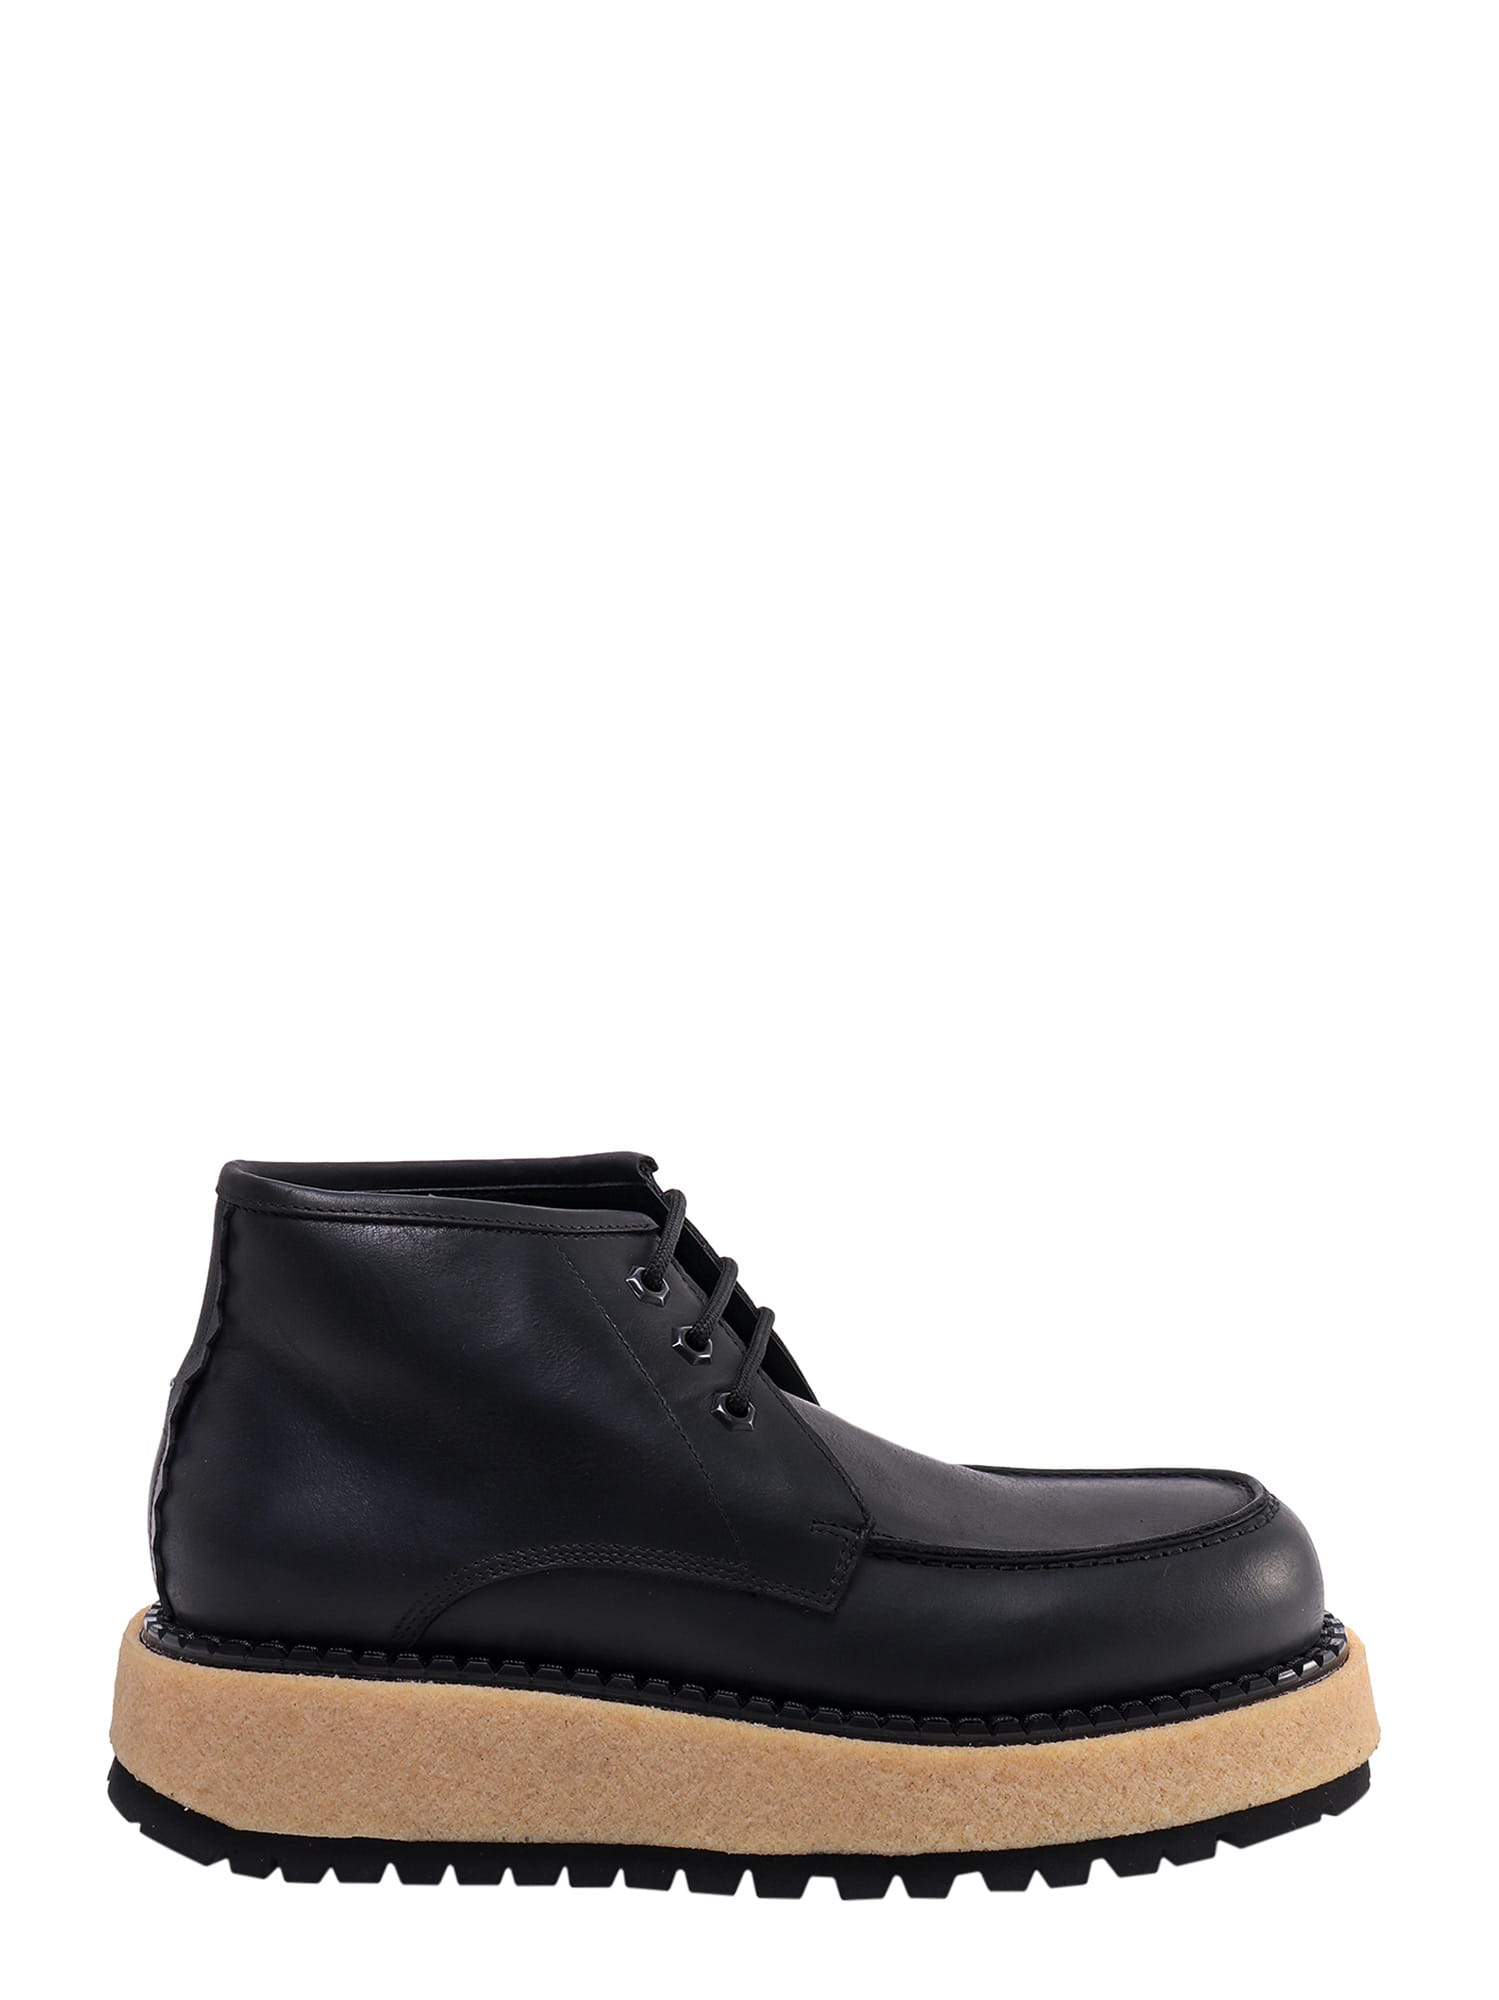 The Antipode Abra 014 Lace-up Shoe